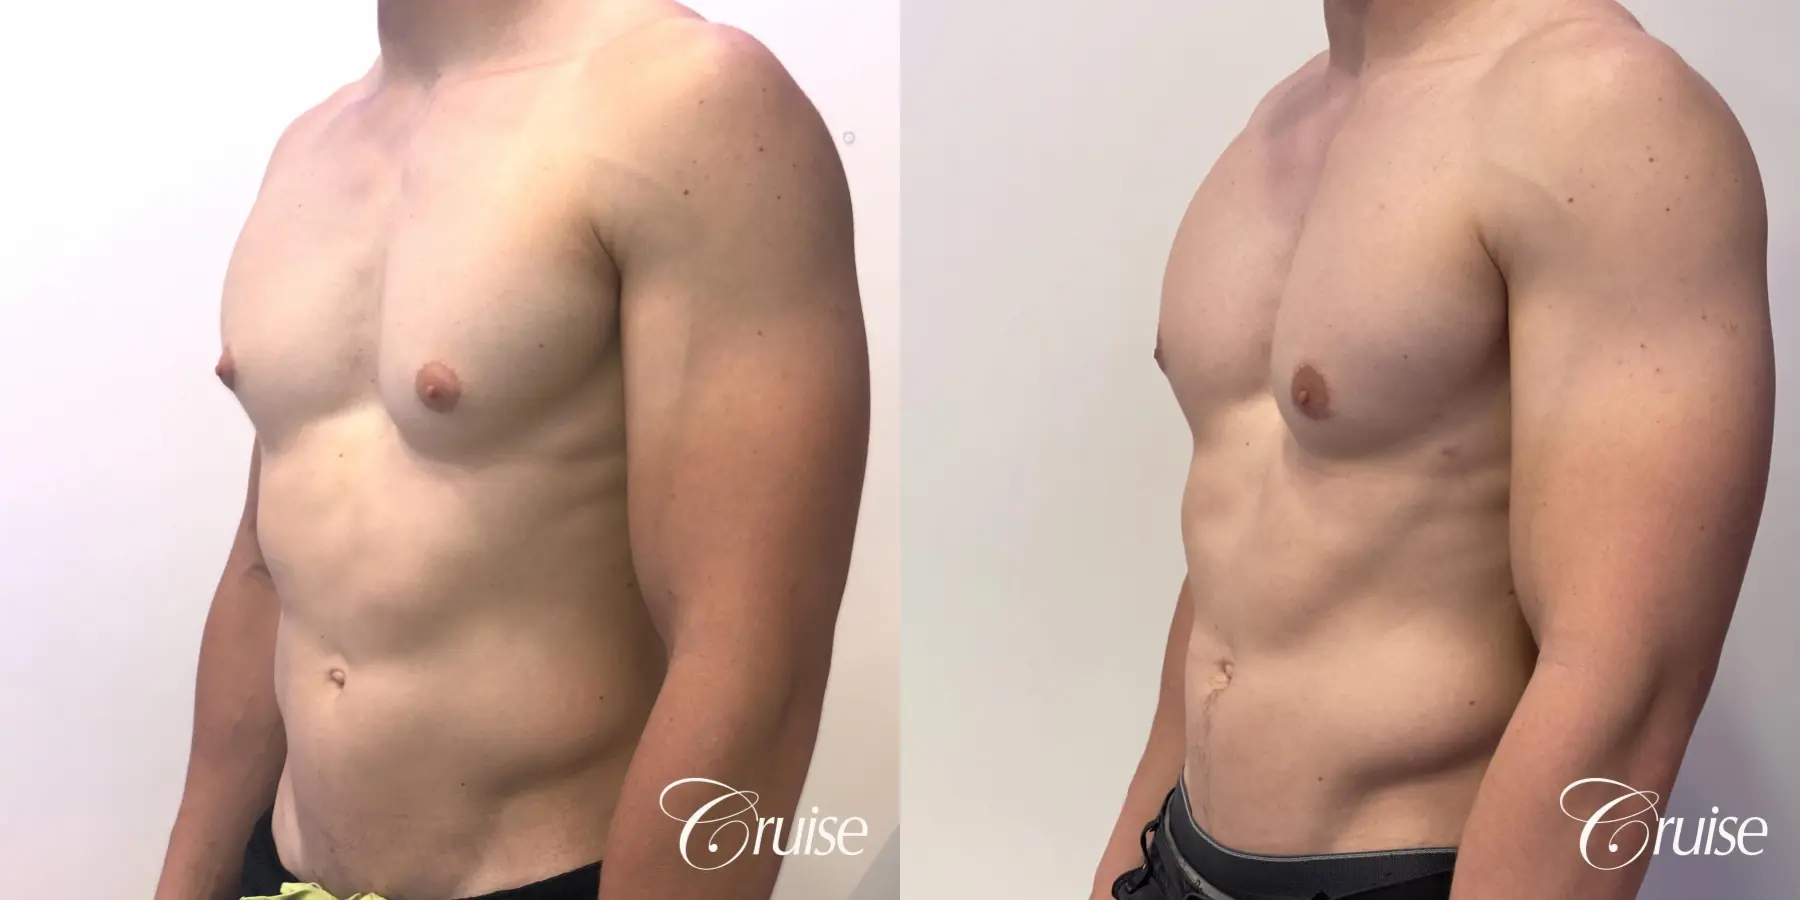 gynecomastia with puffy nipples - Before and After 3